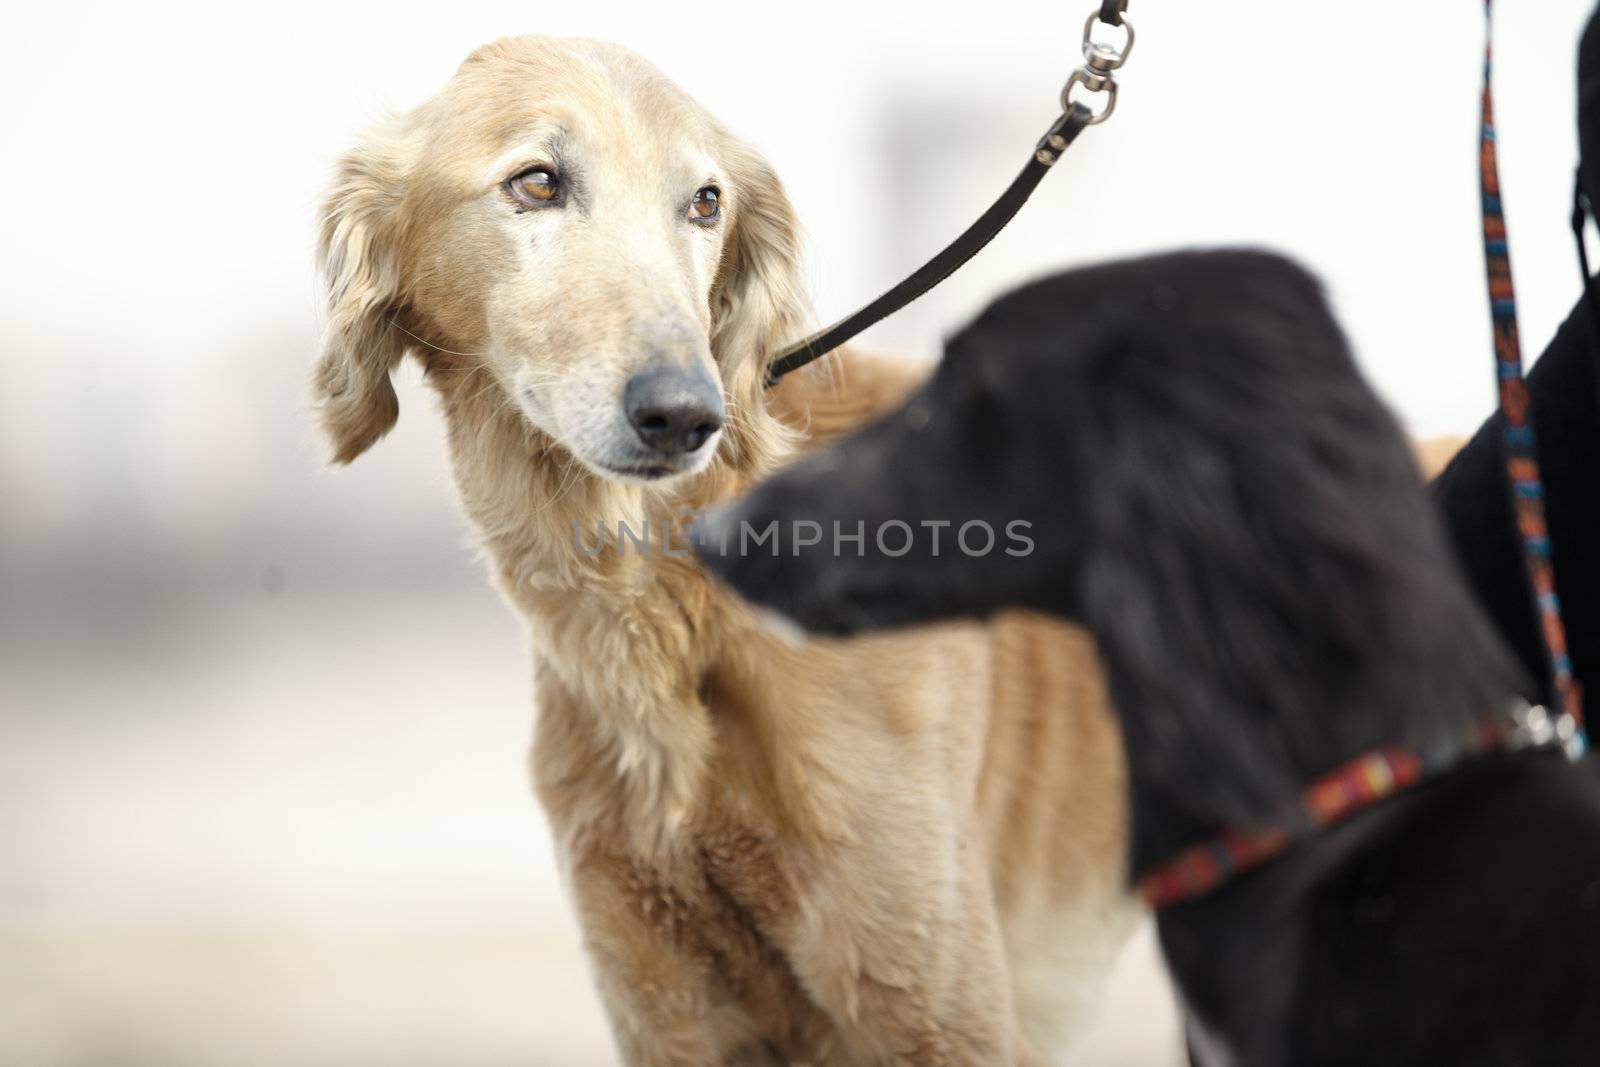 Two Turkmenian greyhound dogs named also as Tazy. Natural light and colors